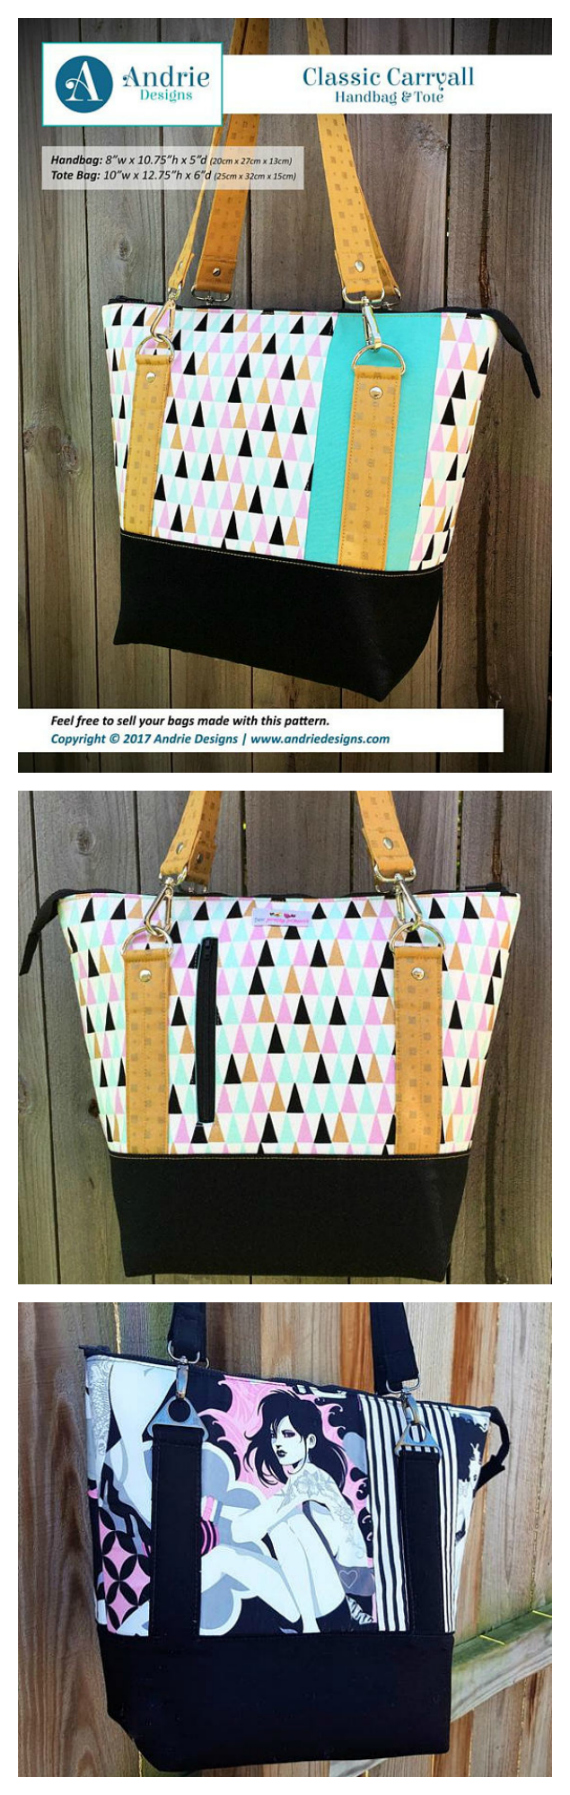 With this pattern, you get to chose whether you want to make a Handbag or a Tote bag or both. You can download below the pdf patterns for the Classic Carryall Handbag & Tote Bag. This pattern has been designed to be simple and quick to construct, yet effective and classic in design. Features include: Simple piecing A vertical outer zipper pocket on the back A full zipper closure along the top And an inner zipper pocket as well Box corners Shiny hardware including optional bag feet Straightforward construction techniques, making this bag a quick and easy sew.